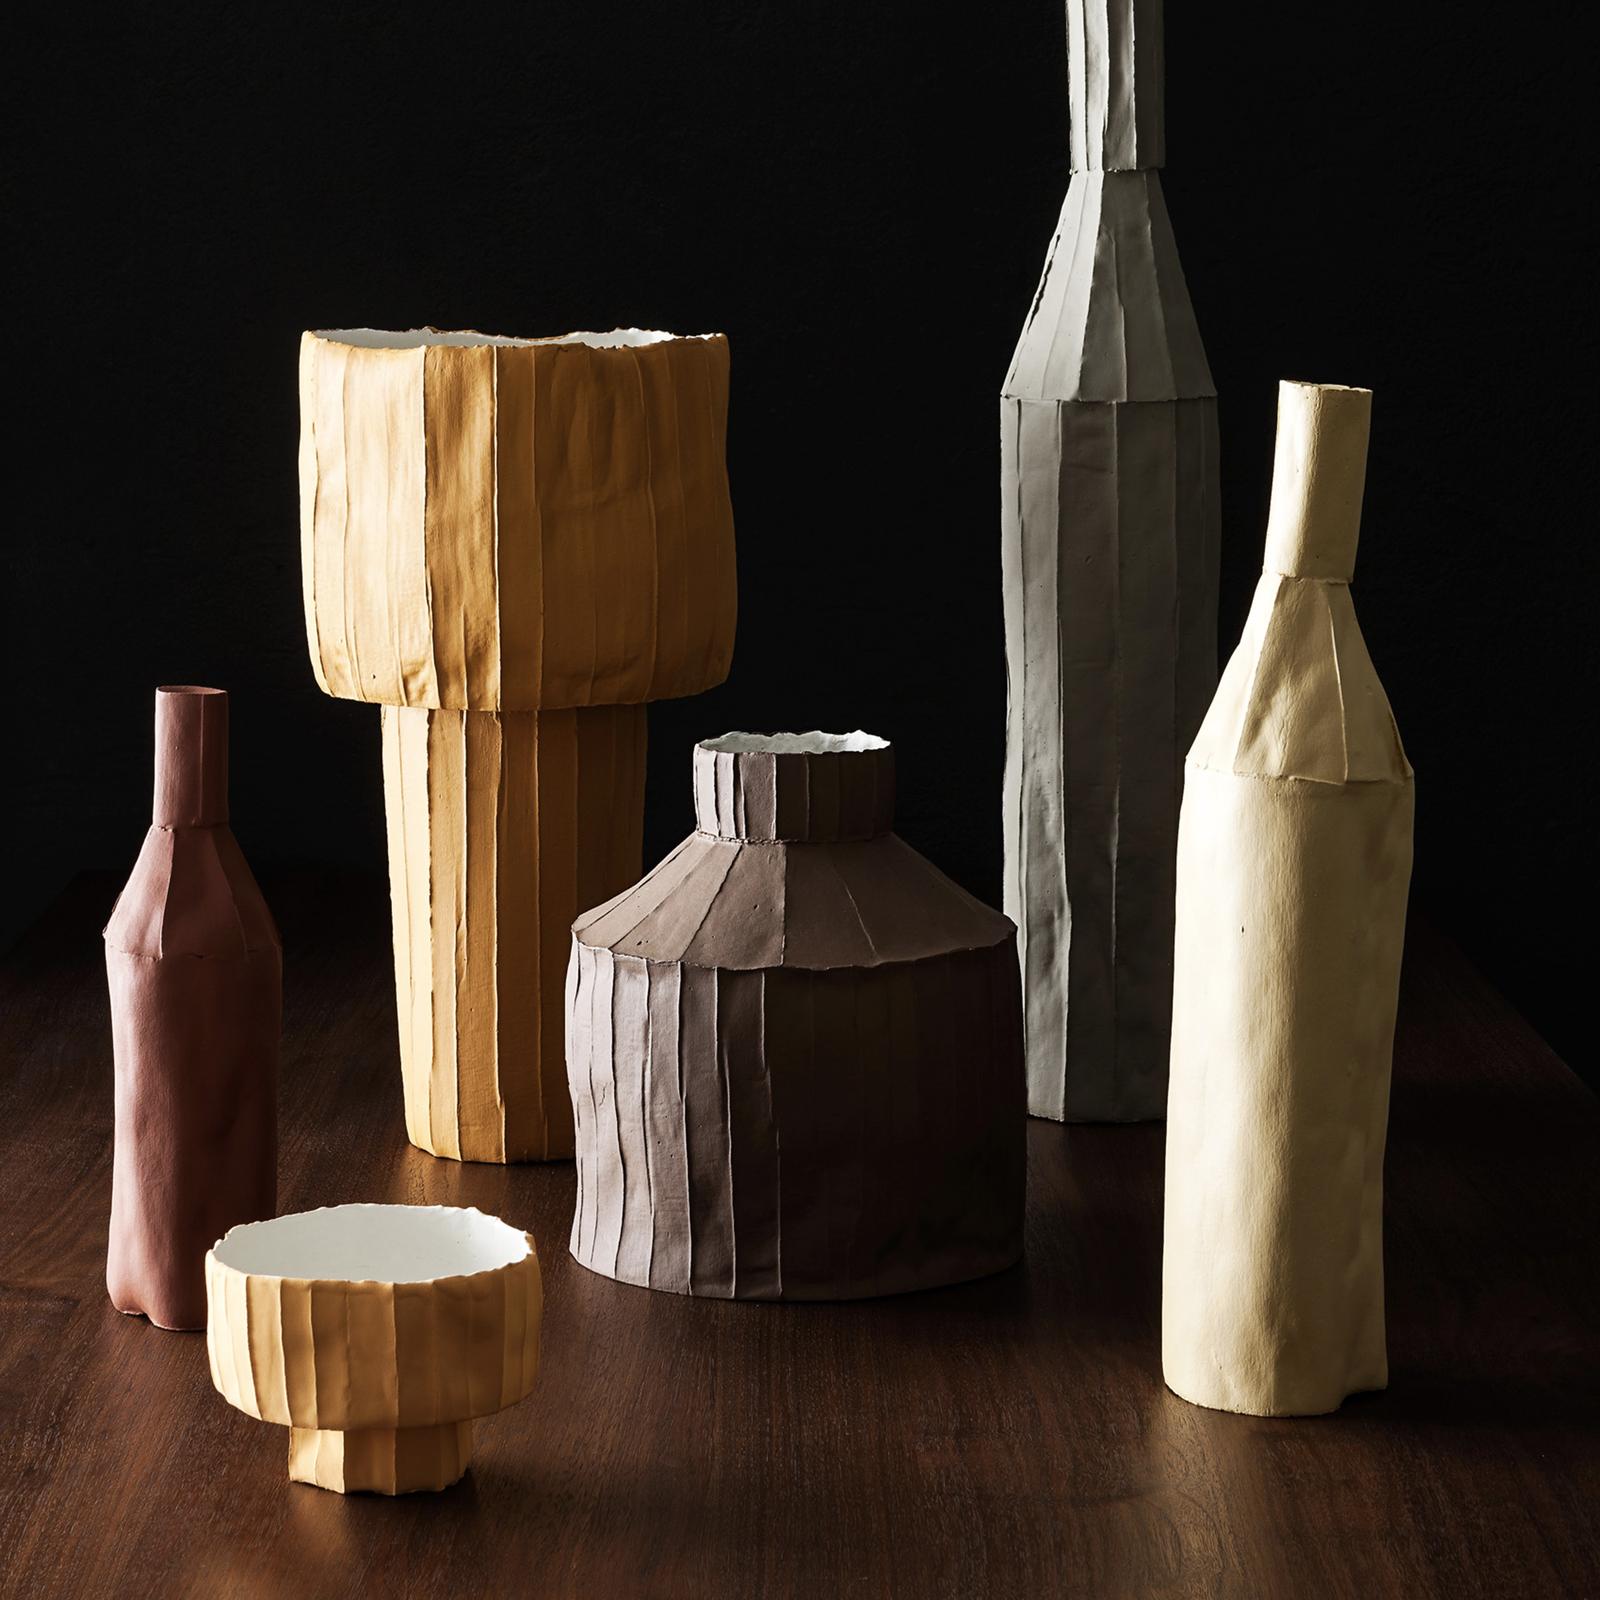 The evocative and distinctive texture of this sculpture is a trademark of Italian ceramist Paola Paronetto, whose creativity gives life to original objects inspired by the real world. This bottle-shaped piece is handcrafted of paper clay, a mixture